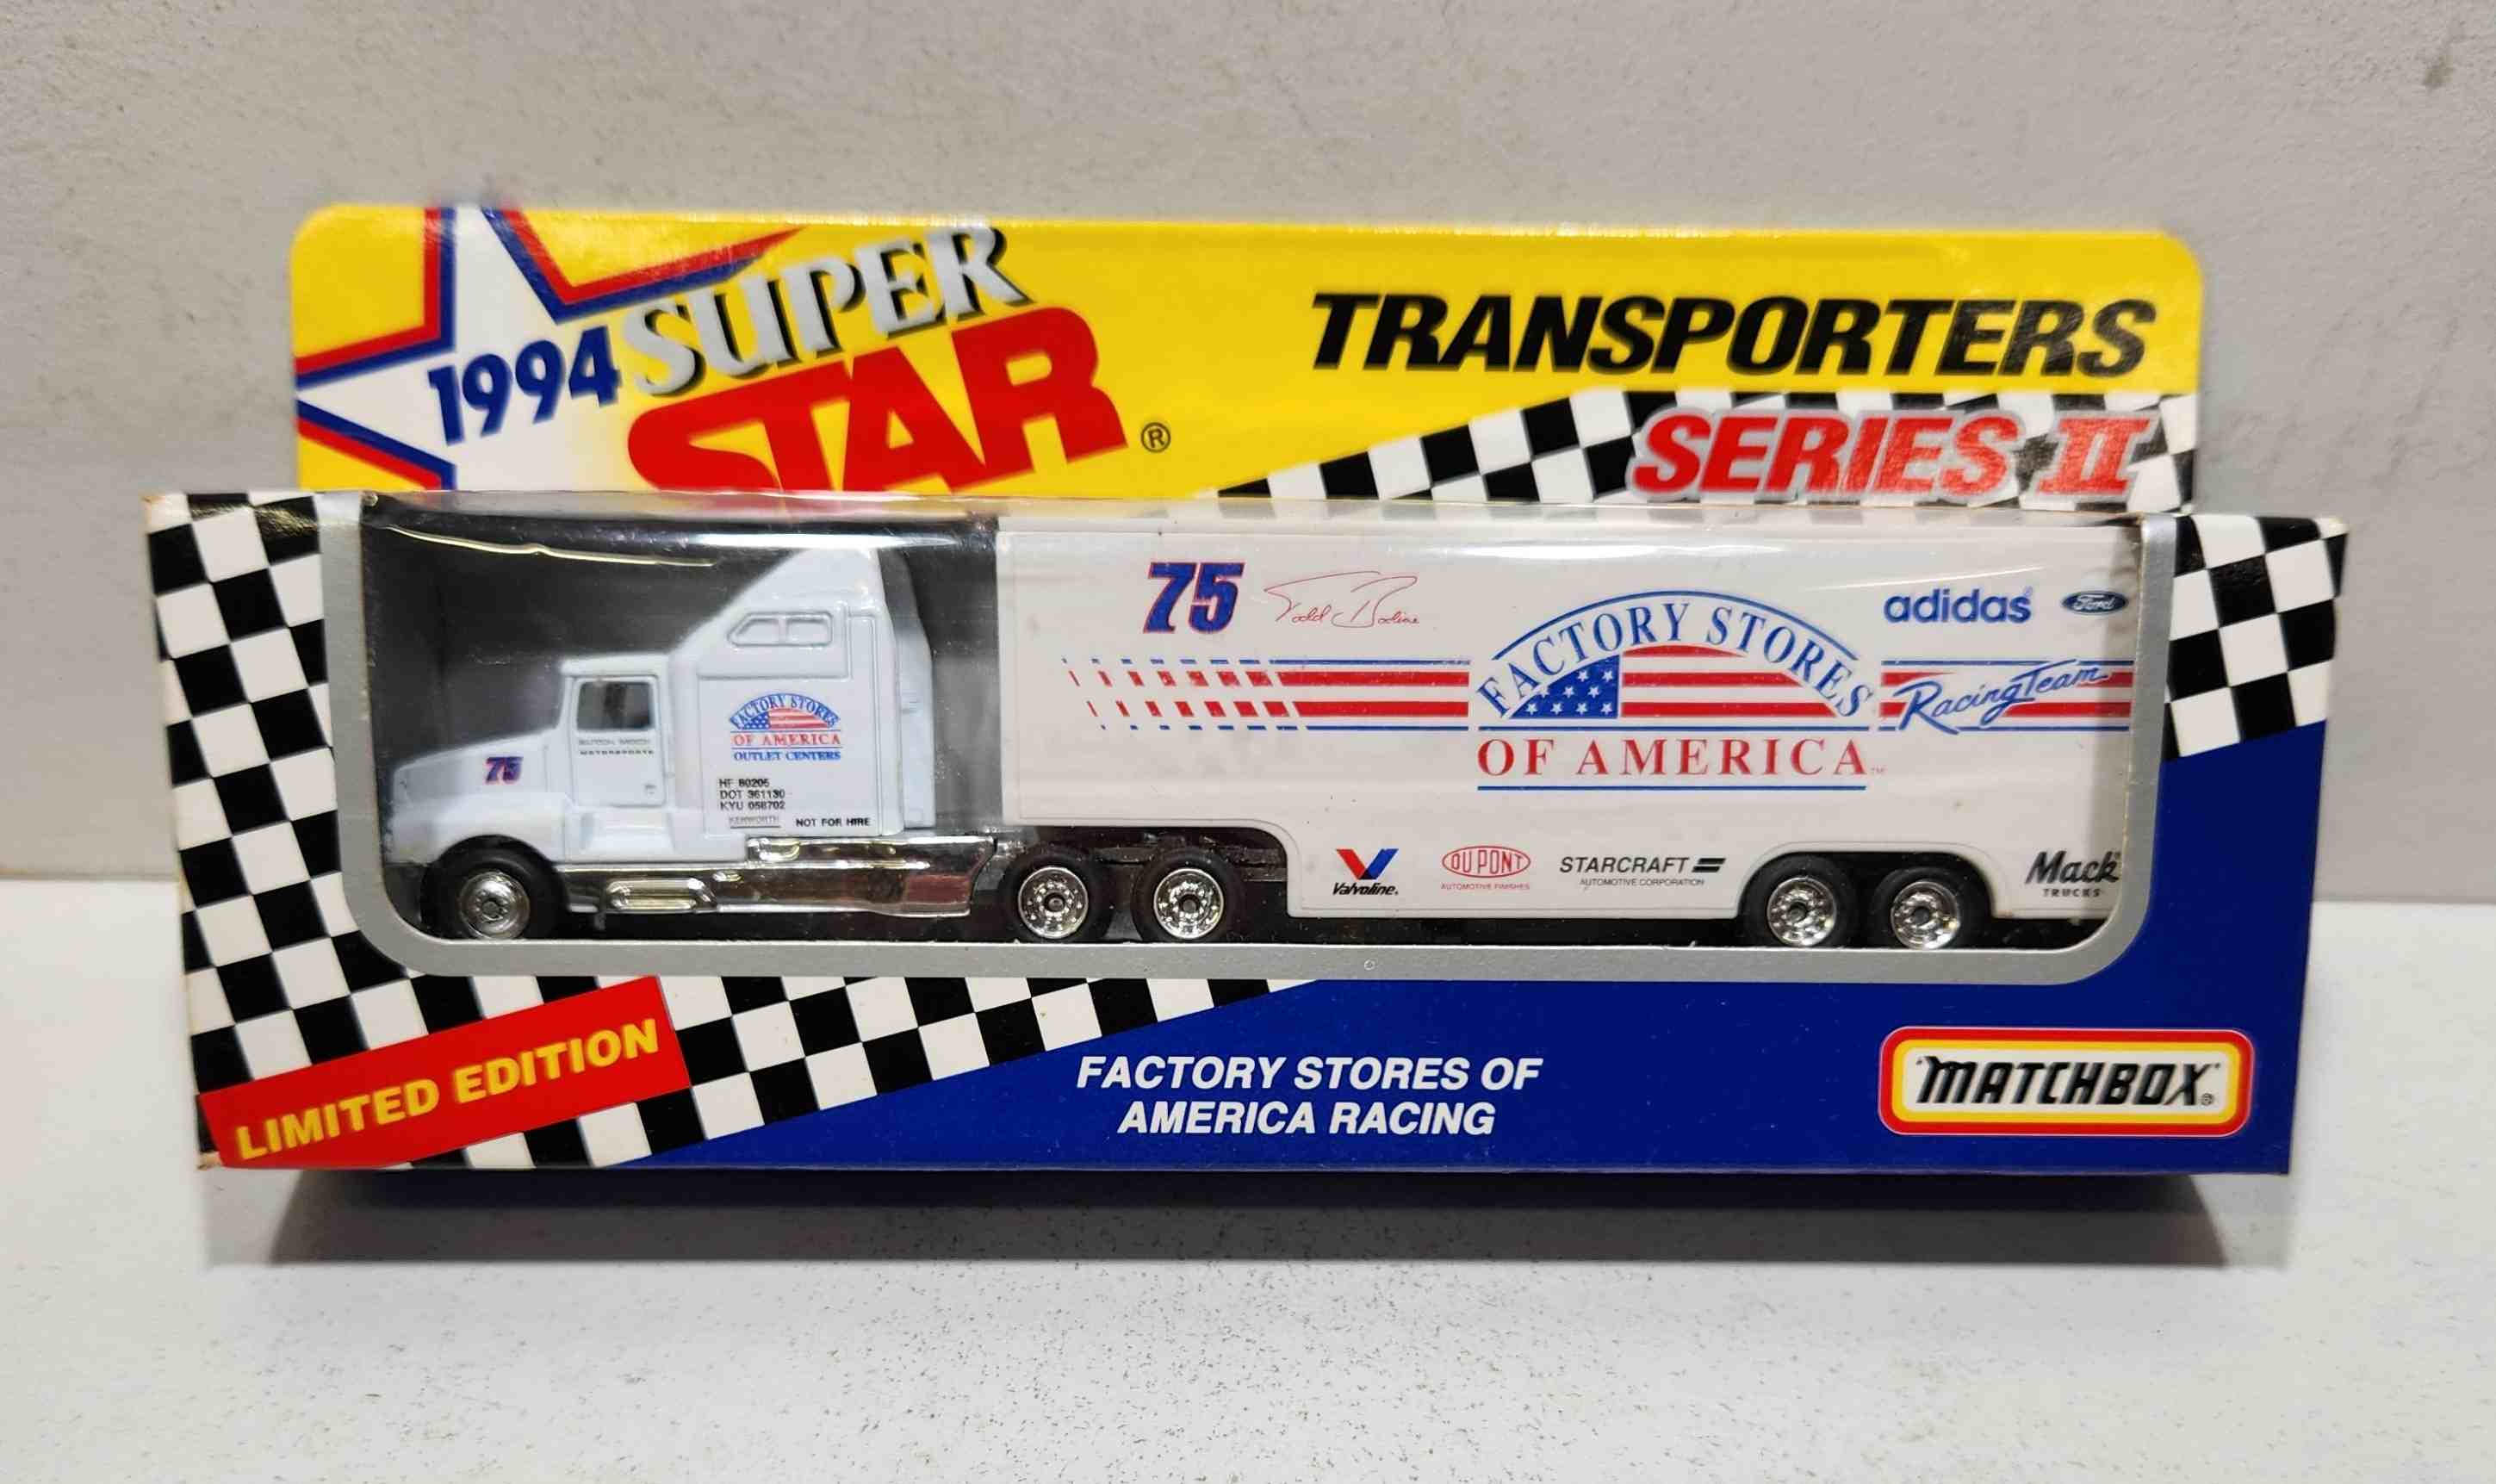 1994 Todd Bodine 1/80th Factory Stores "Busch Series" Transporter